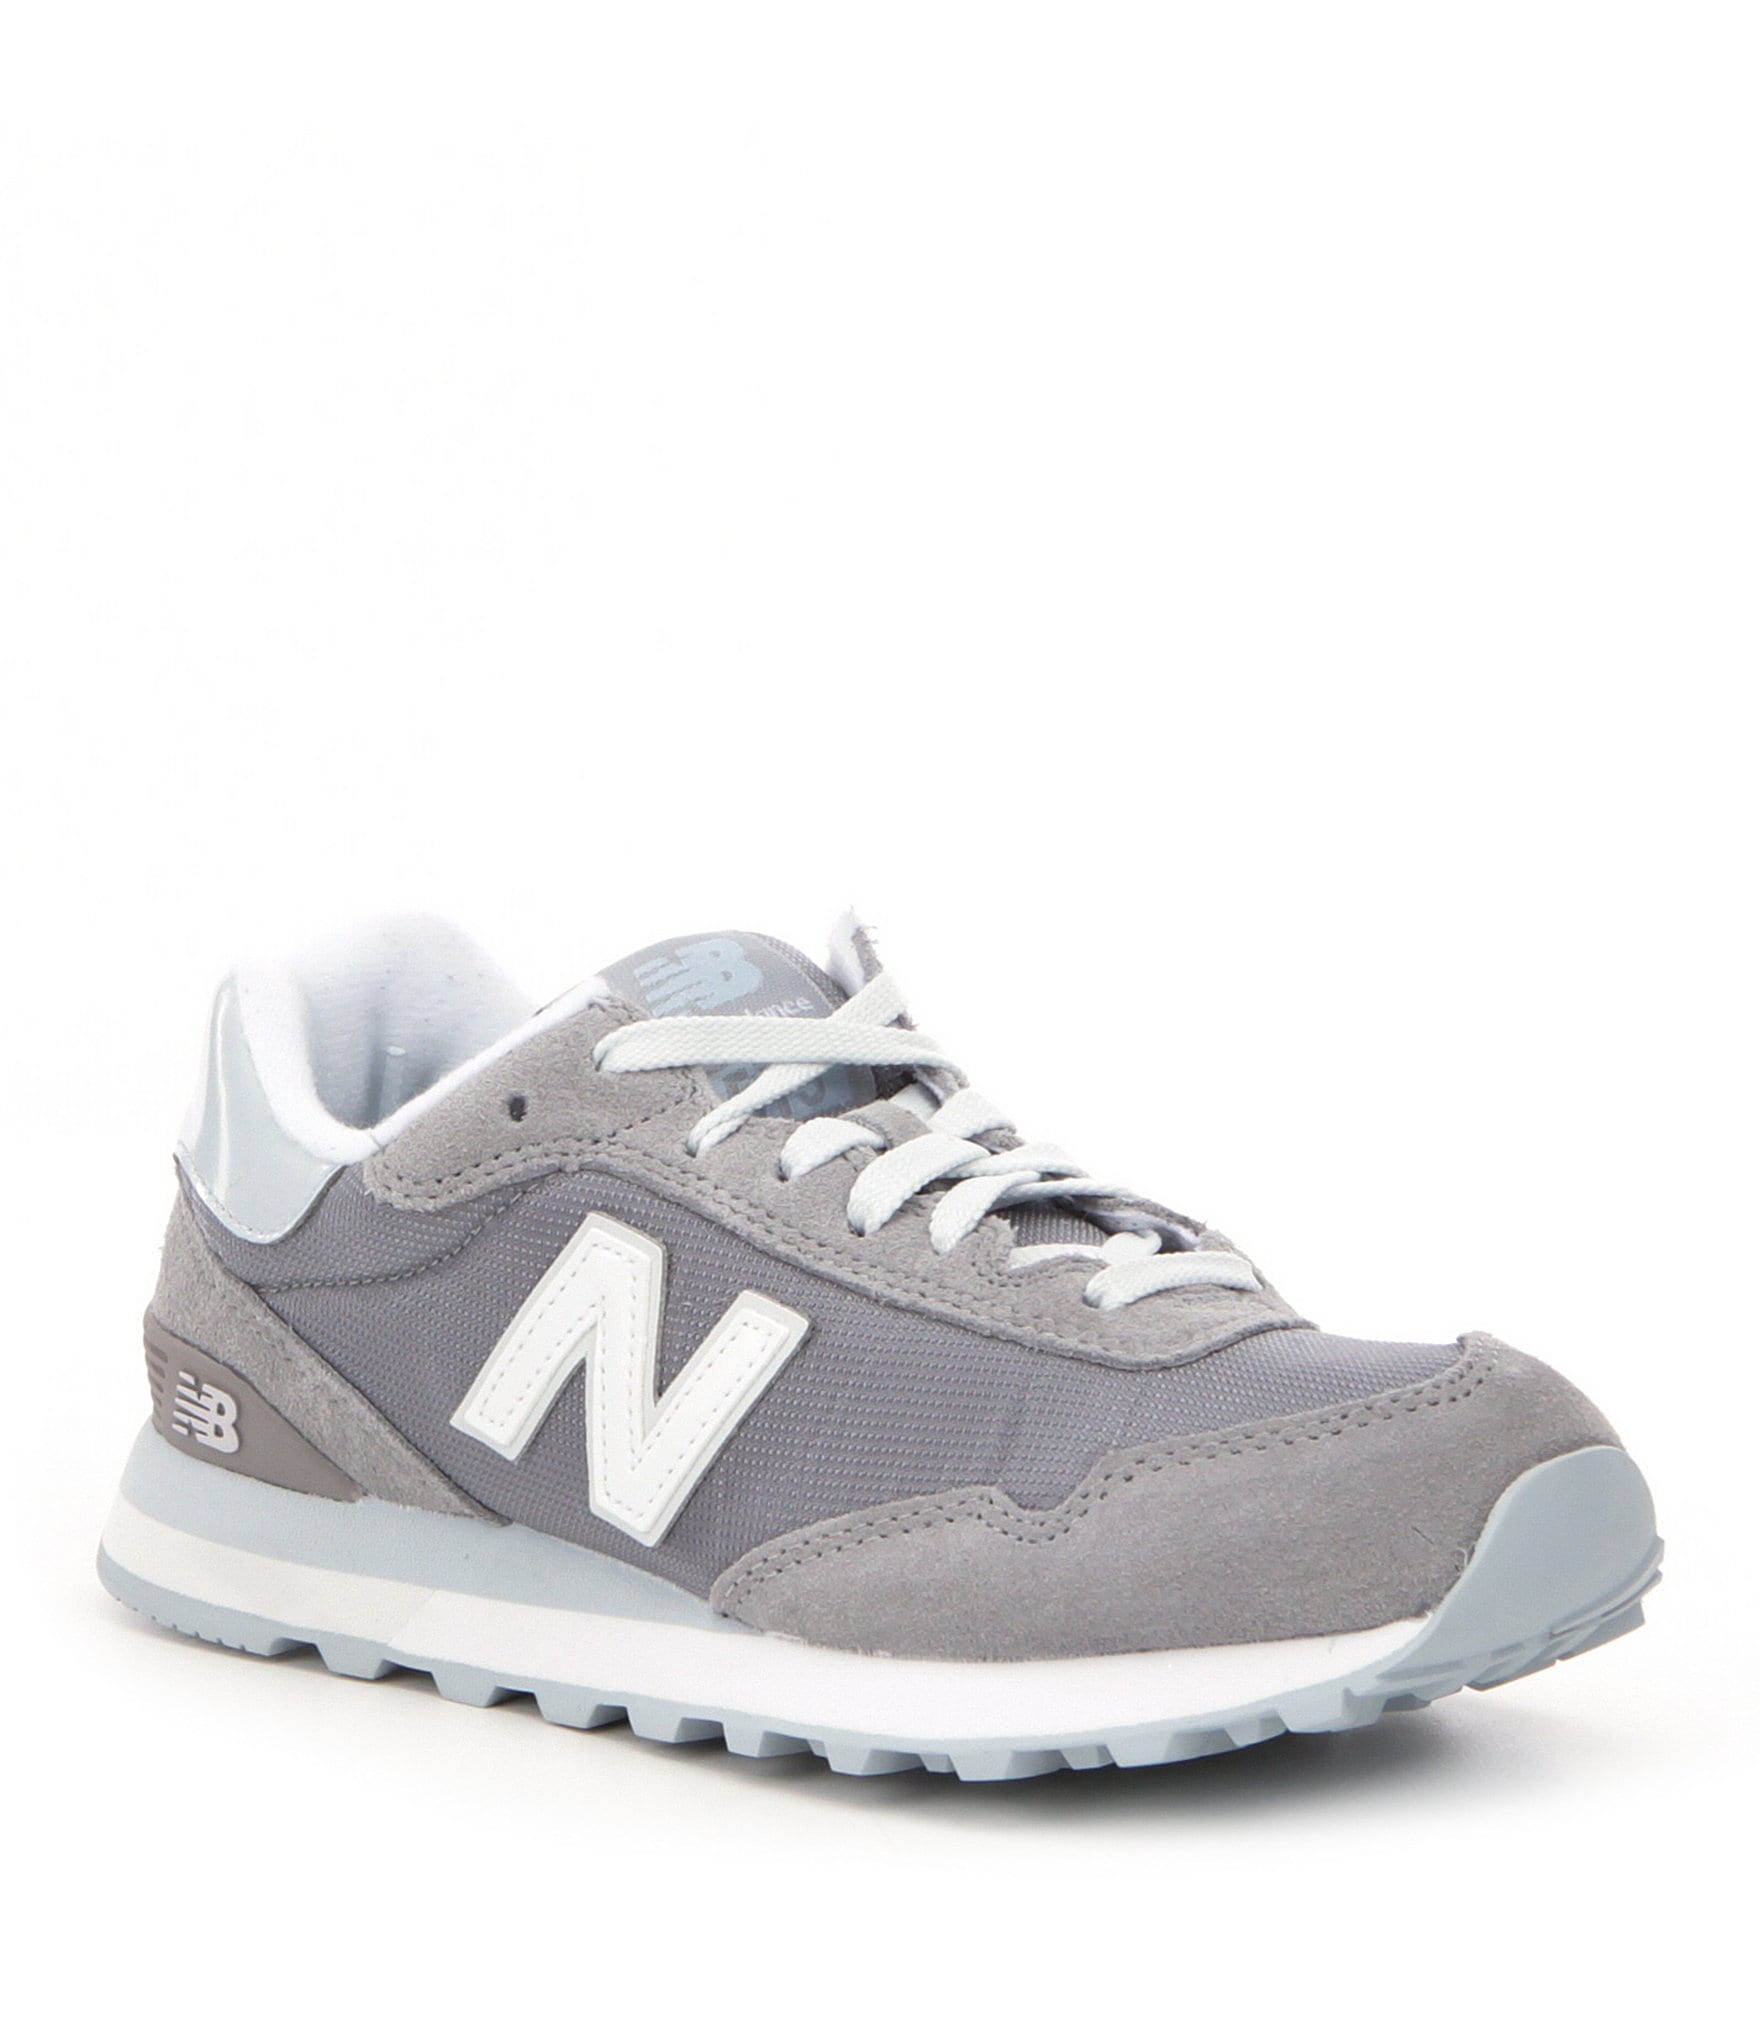 Cheap nb 515 \u003eFree shipping for 